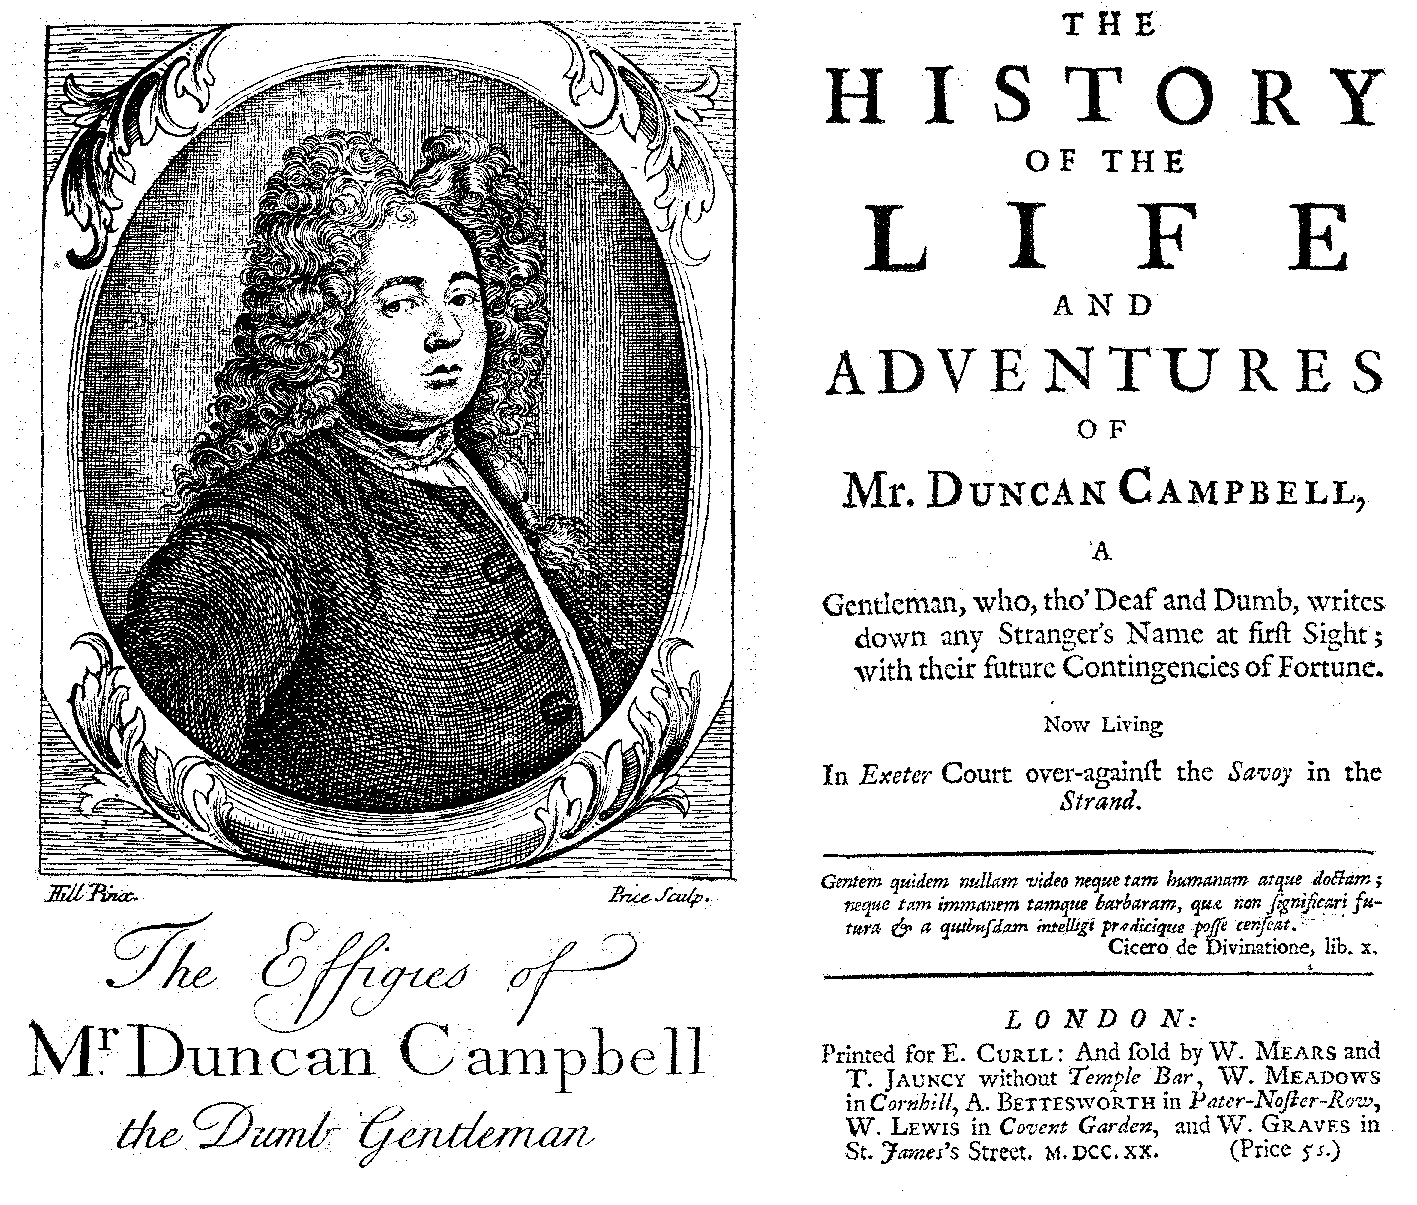 [Daniel DeFoe?] The History of the Life and Adventures of Mr. Duncan Campbell (London: E. Curll/ W. Mears/ T. Jauncy/ W. Meadows/ A. Bettesworth/ W. Lewis/ W. Graves, 1720).